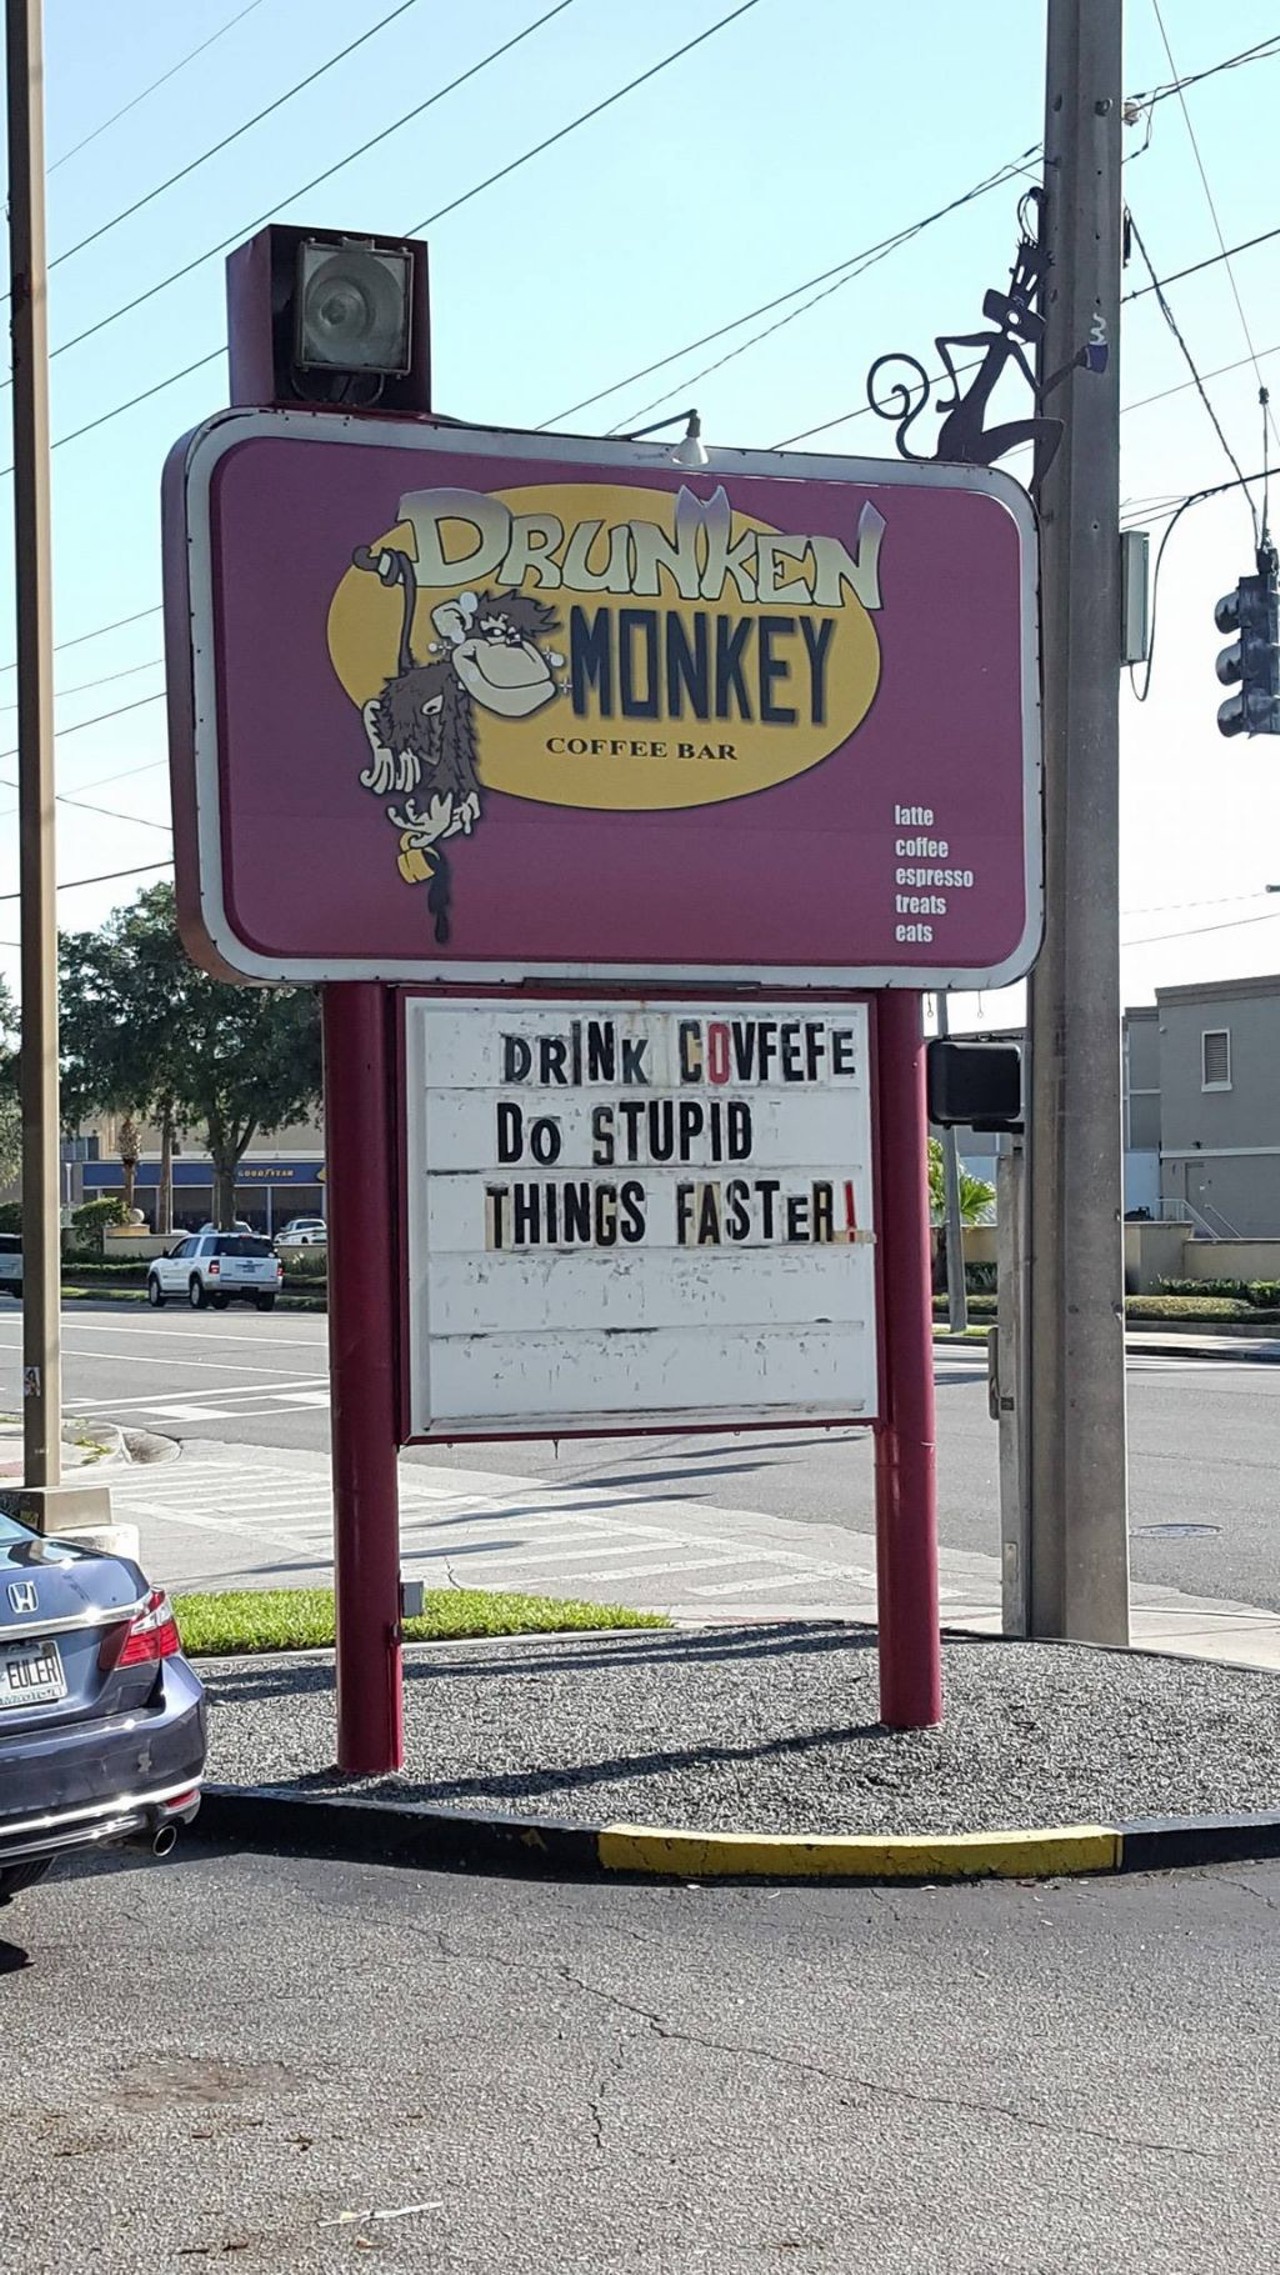 Drunken Monkey Coffee Bar 
444 N Bumby Ave, Orlando, FL 32803, (407) 893-4994
They have delicious pastries, coffee, teas and sandwiches. Drunken Monkey offers limited outdoor seating for you and your pets. 
Photo via Drunken Monkey Coffee Bar/Facebook